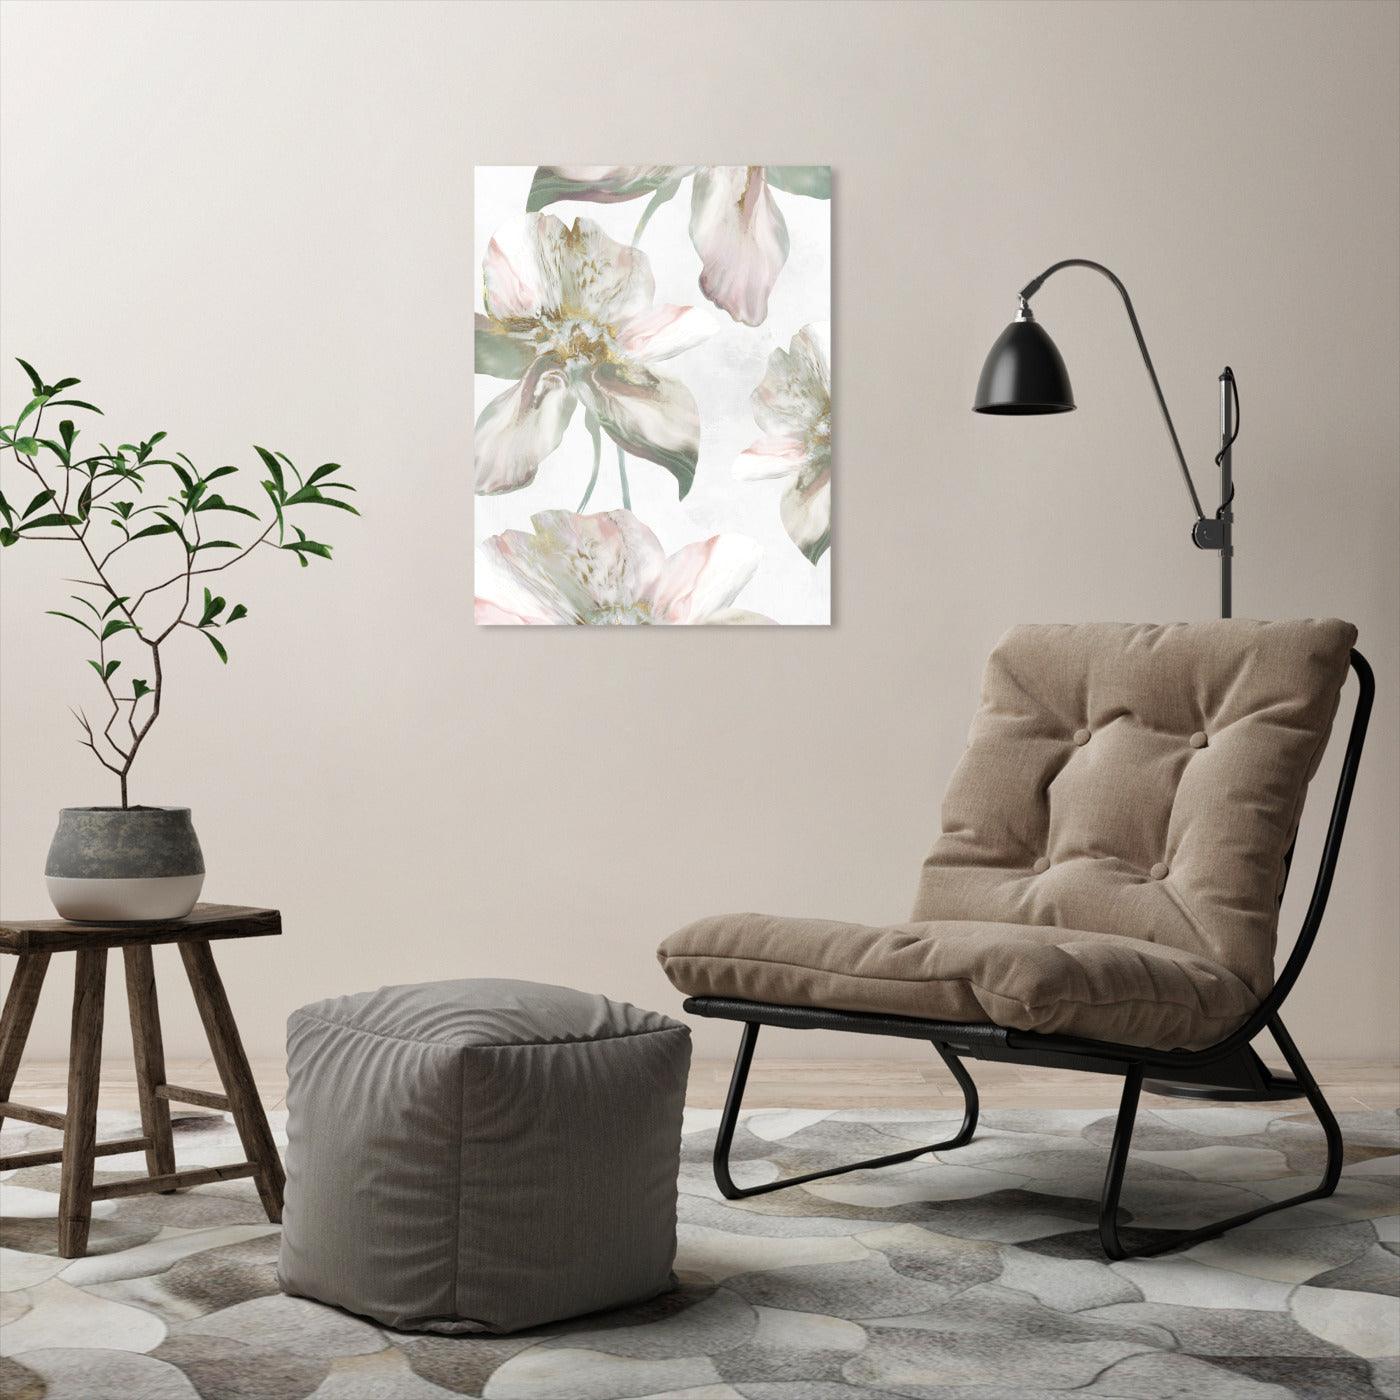 Silk Blush Ii by PI Creative Art - Wrapped Canvas - Americanflat